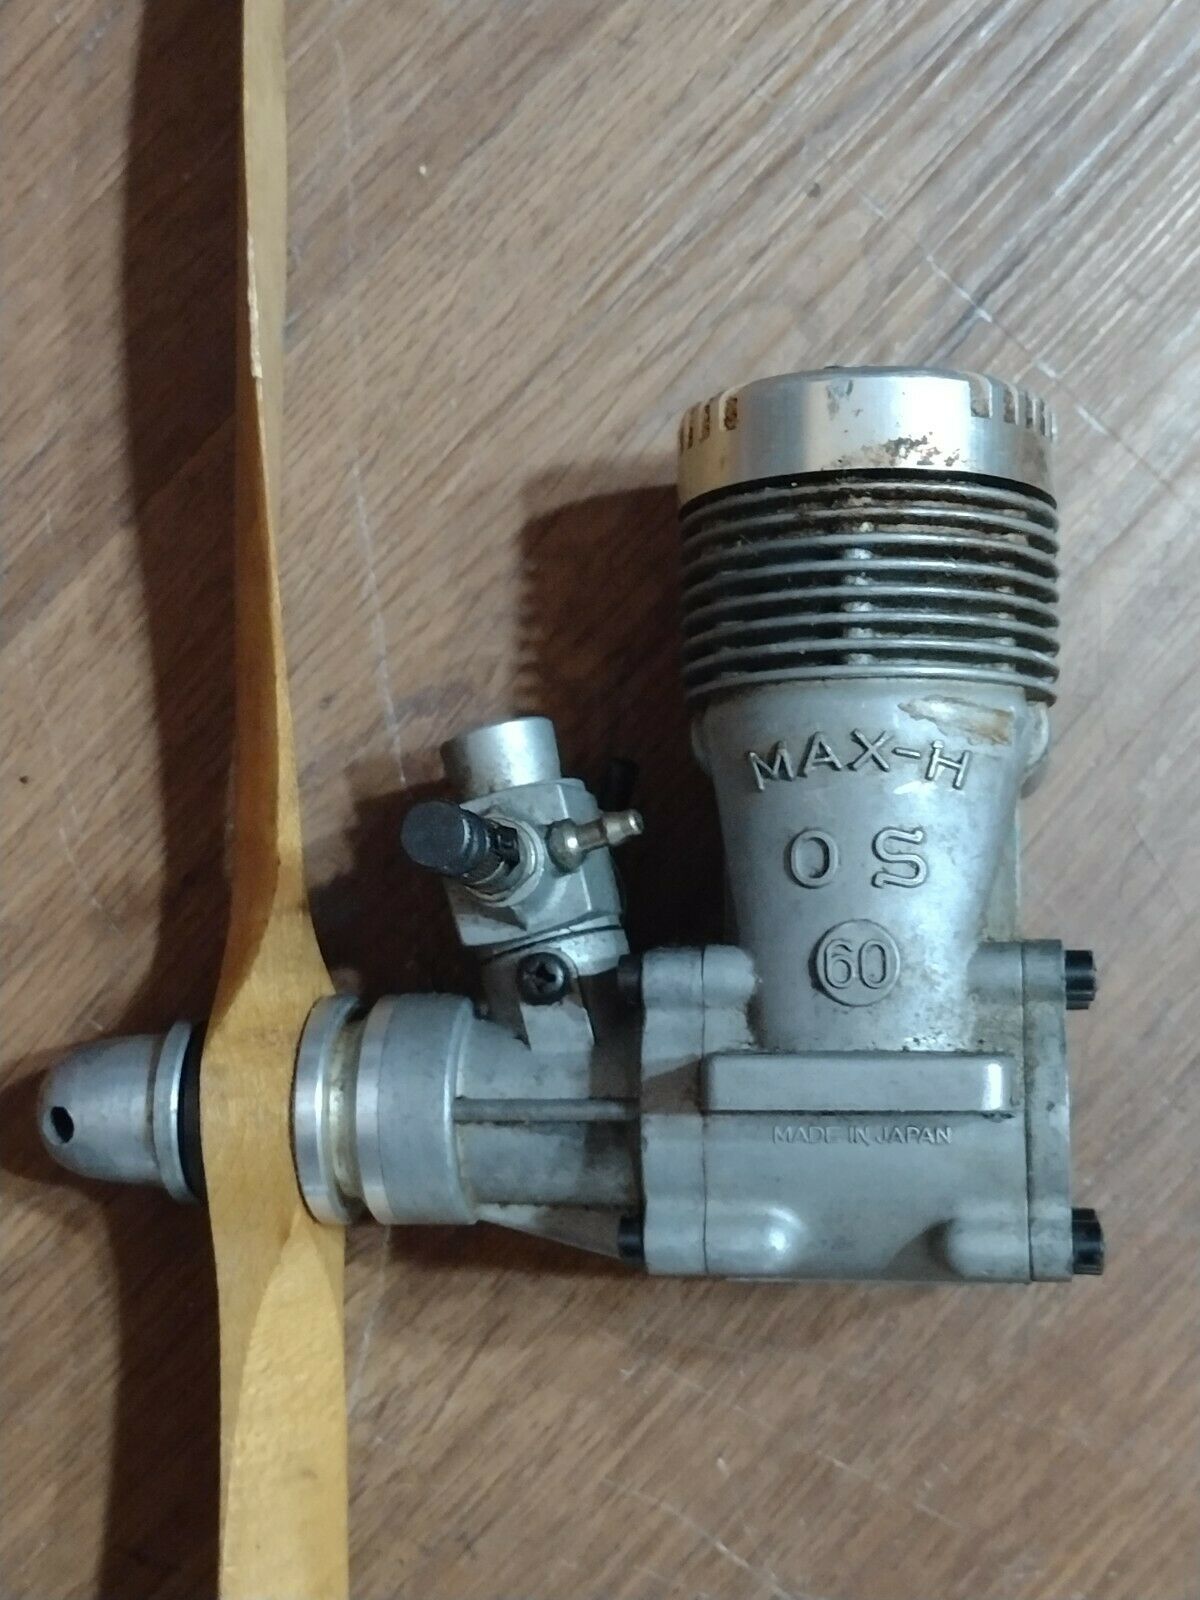 Os Max-h Os 60 Nitro Vintage Rc Airplane Engine Motor Used Good Compression Part